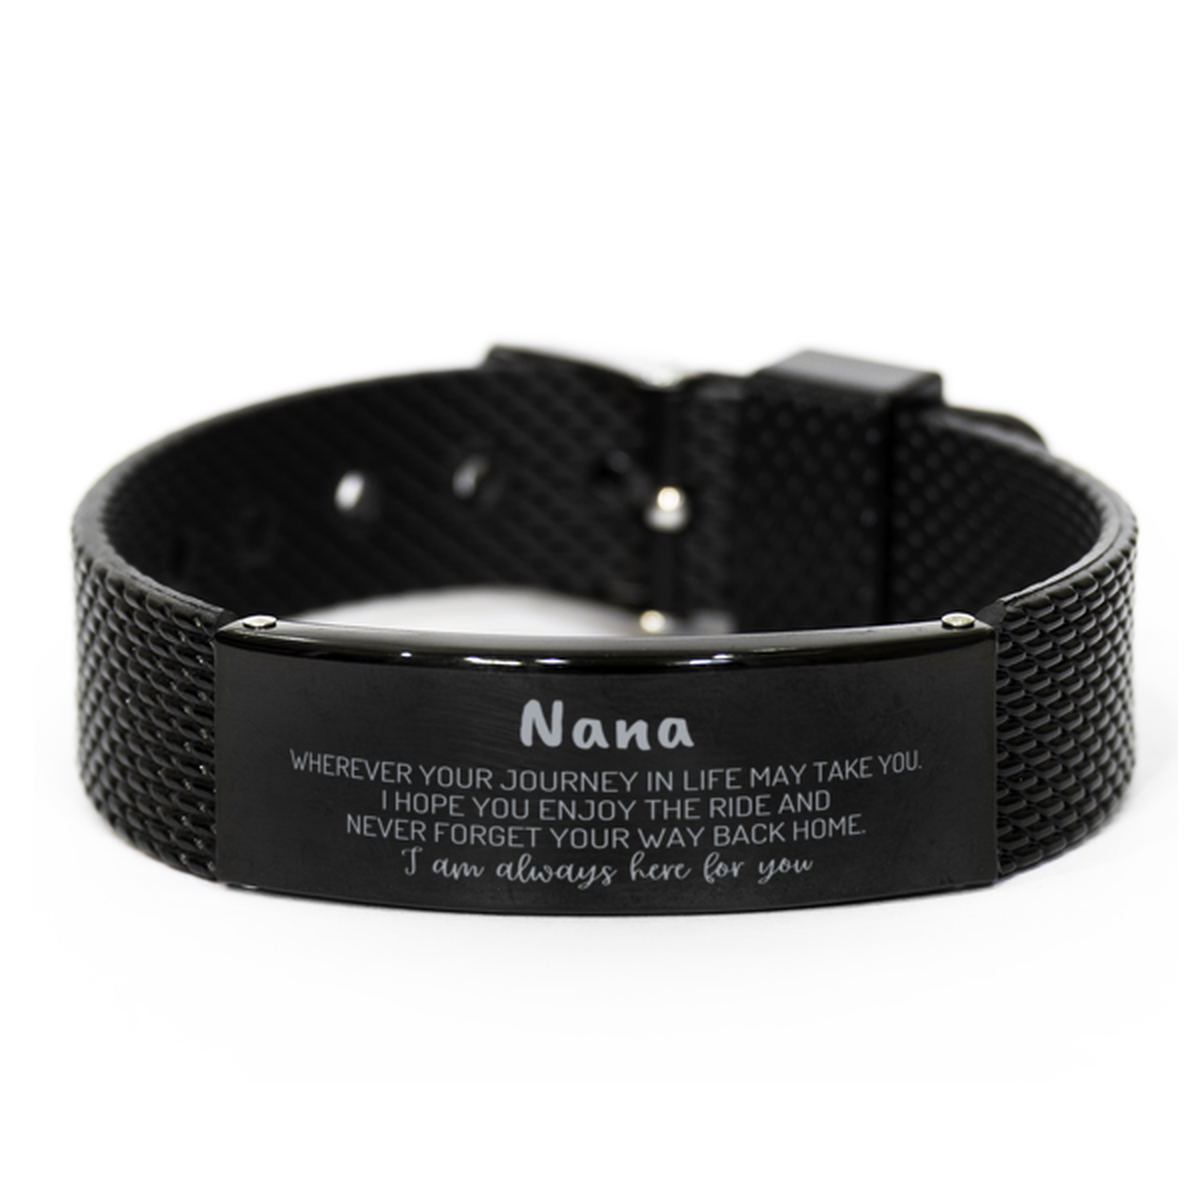 Nana wherever your journey in life may take you, I am always here for you Nana Black Shark Mesh Bracelet, Awesome Christmas Gifts For Nana, Nana Birthday Gifts for Men Women Family Loved One